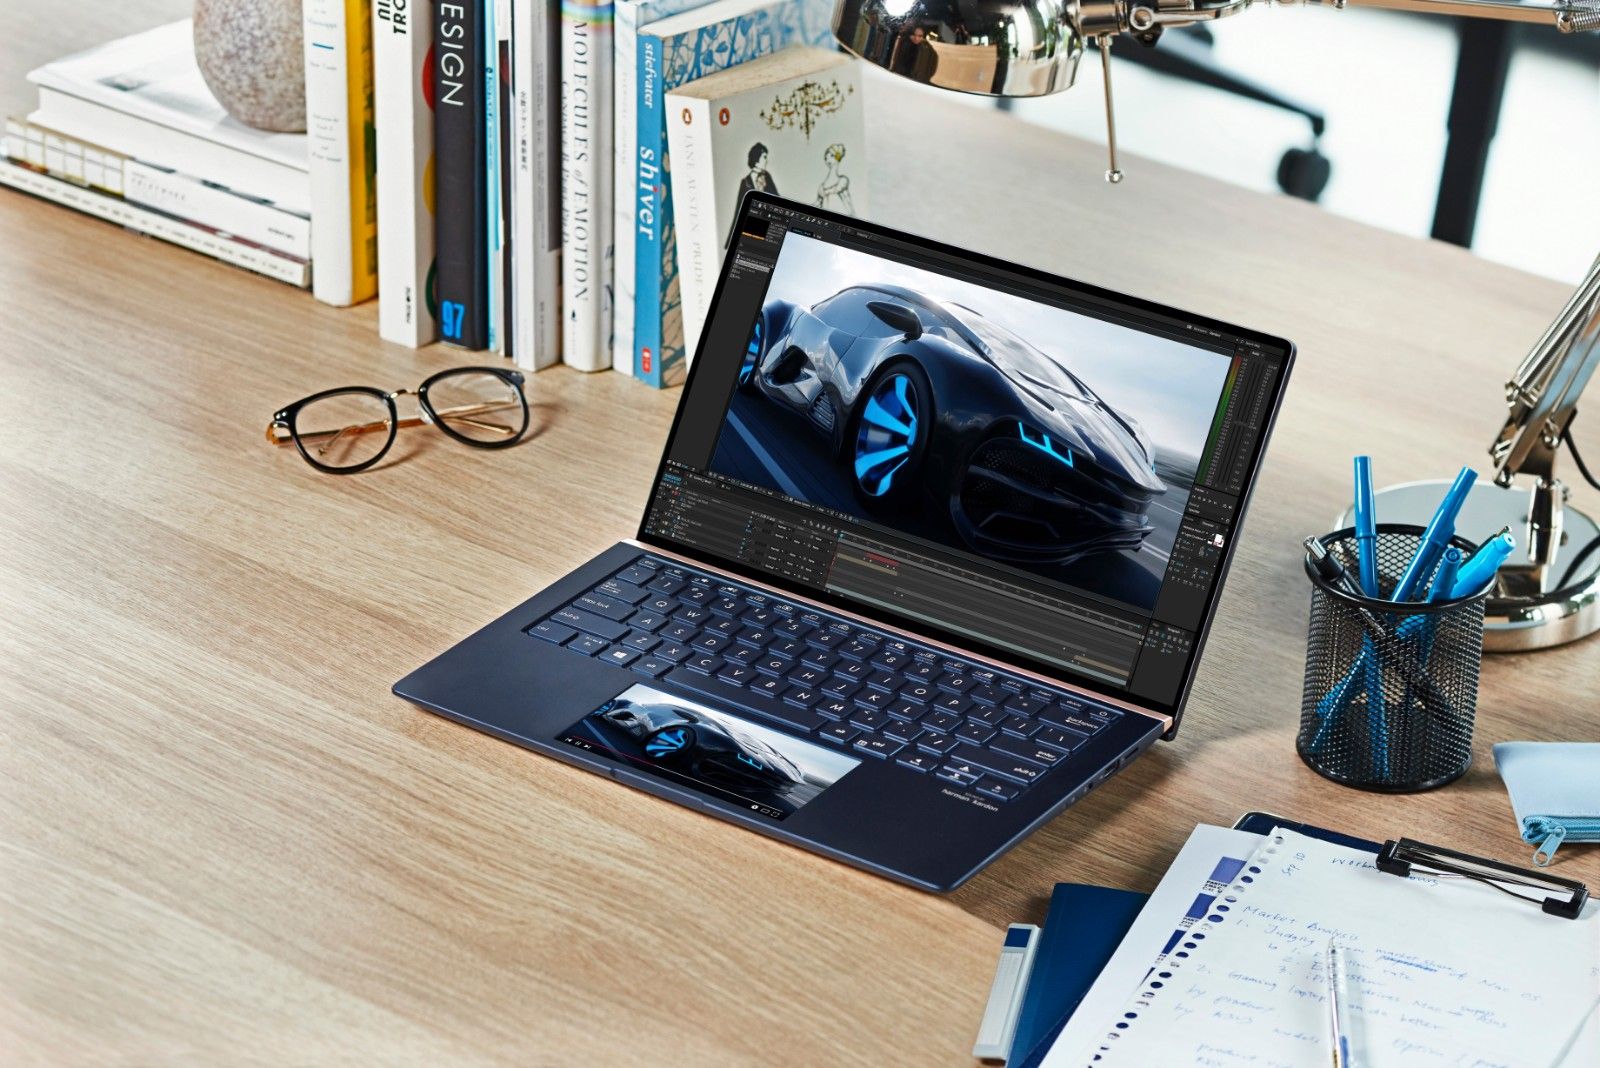 Asus announces new ZenBooks and VivoBooks with dual screen tech image 1